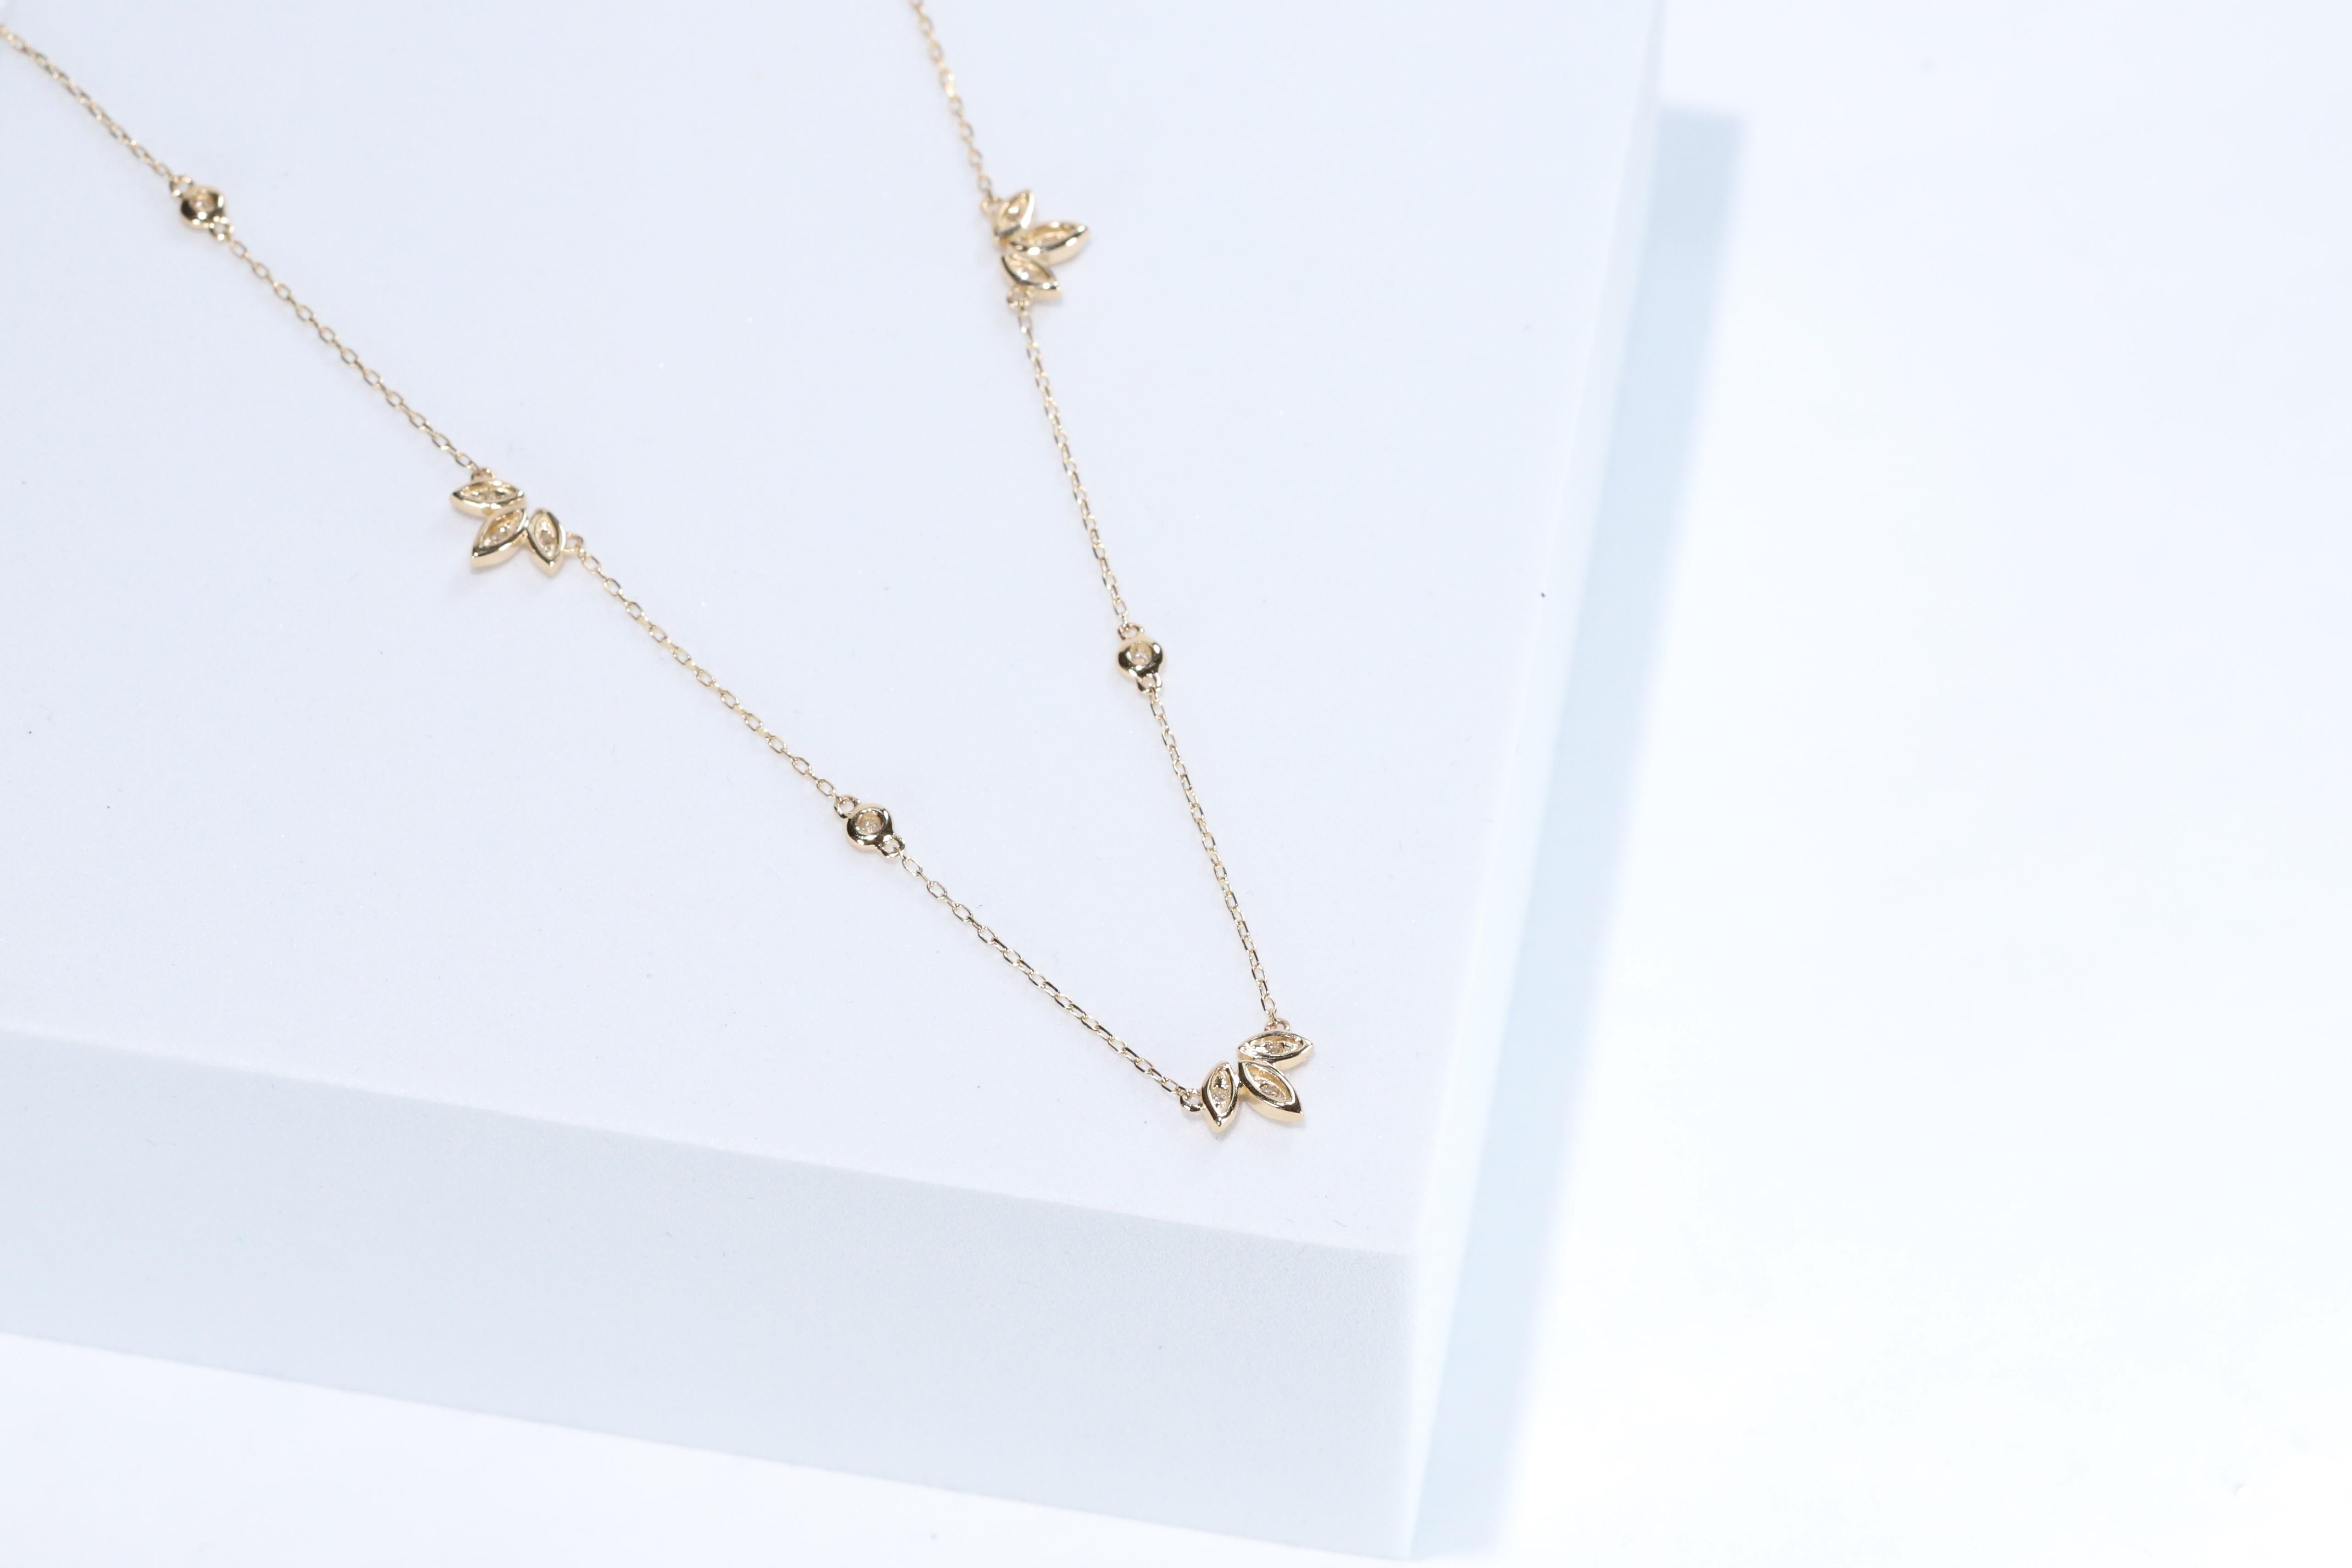 Stunning, timeless and classy eternity Unique Necklace. Decorate yourself in luxury with this Gin & Grace Necklace. The 14K Yellow Gold jewelry boasts with Natural Round-cut white Diamond (13 Pcs) 0.20 Carat accent stones for a lovely design. This